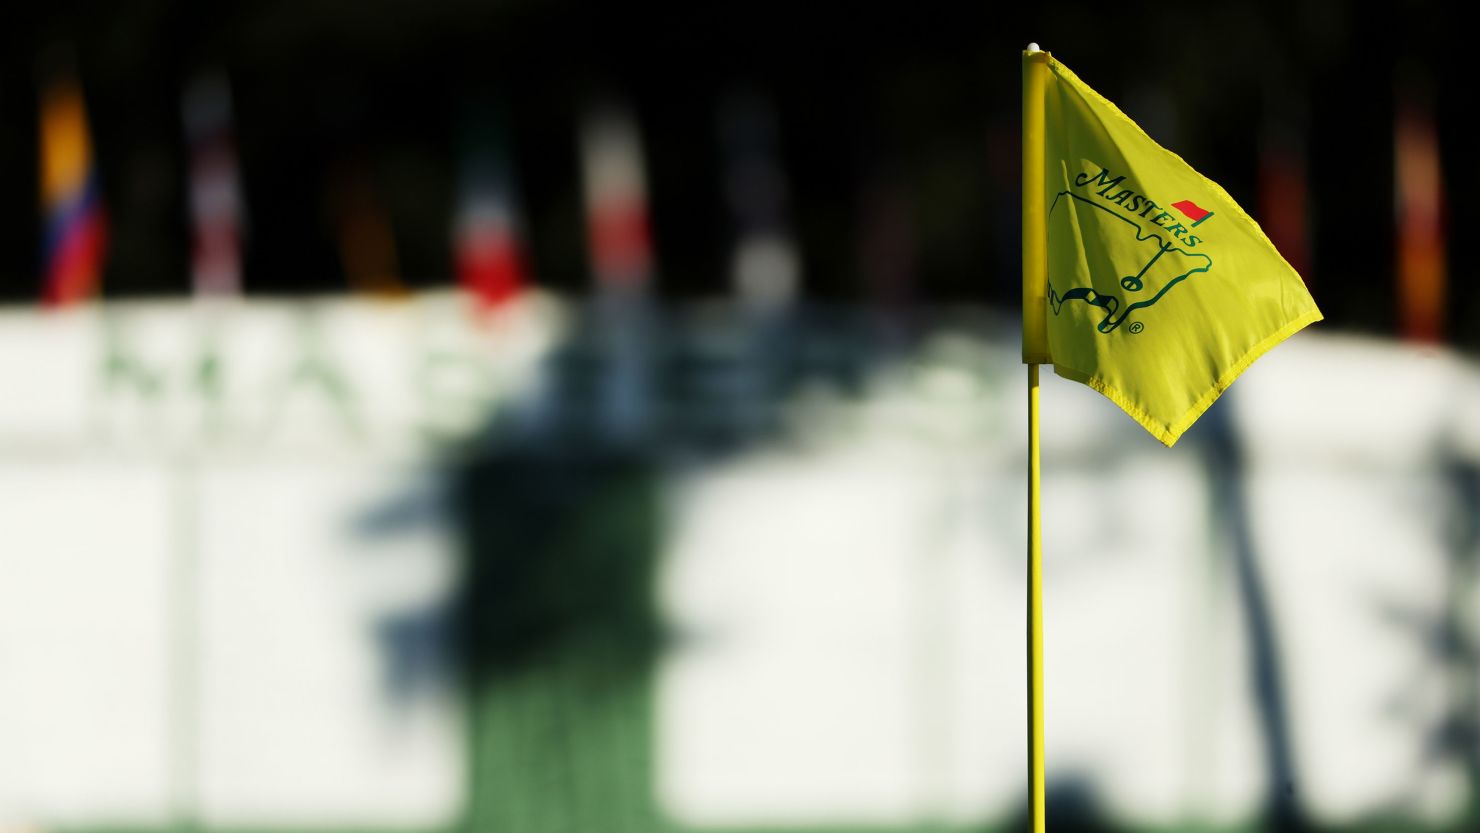 2023 Masters Thursday tee times, TV info for Augusta National